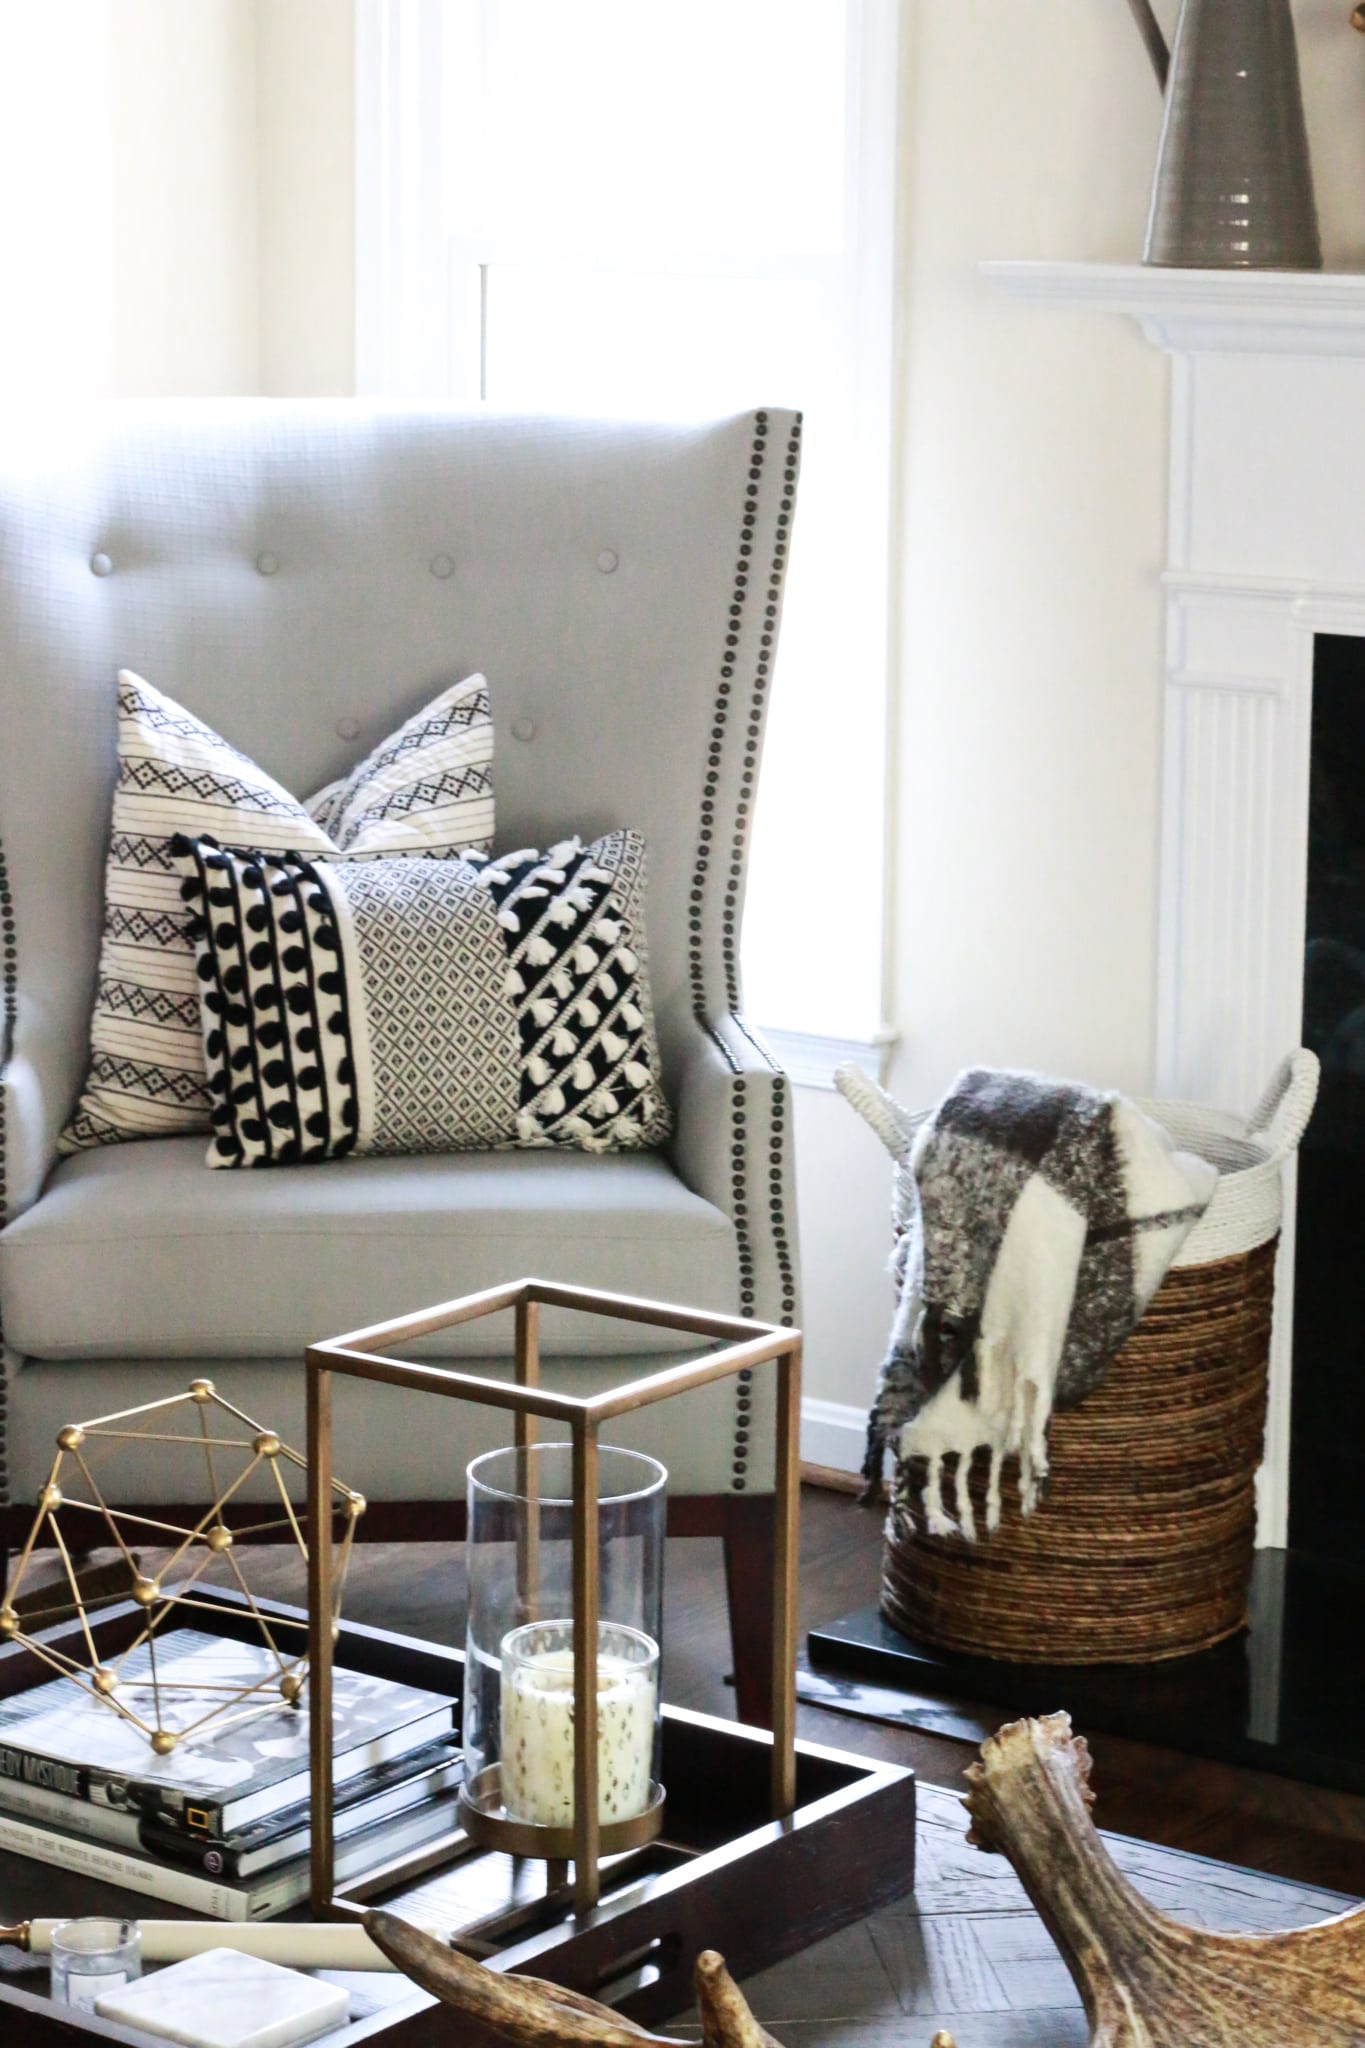 5 easy ways to add subtle fall details to your home